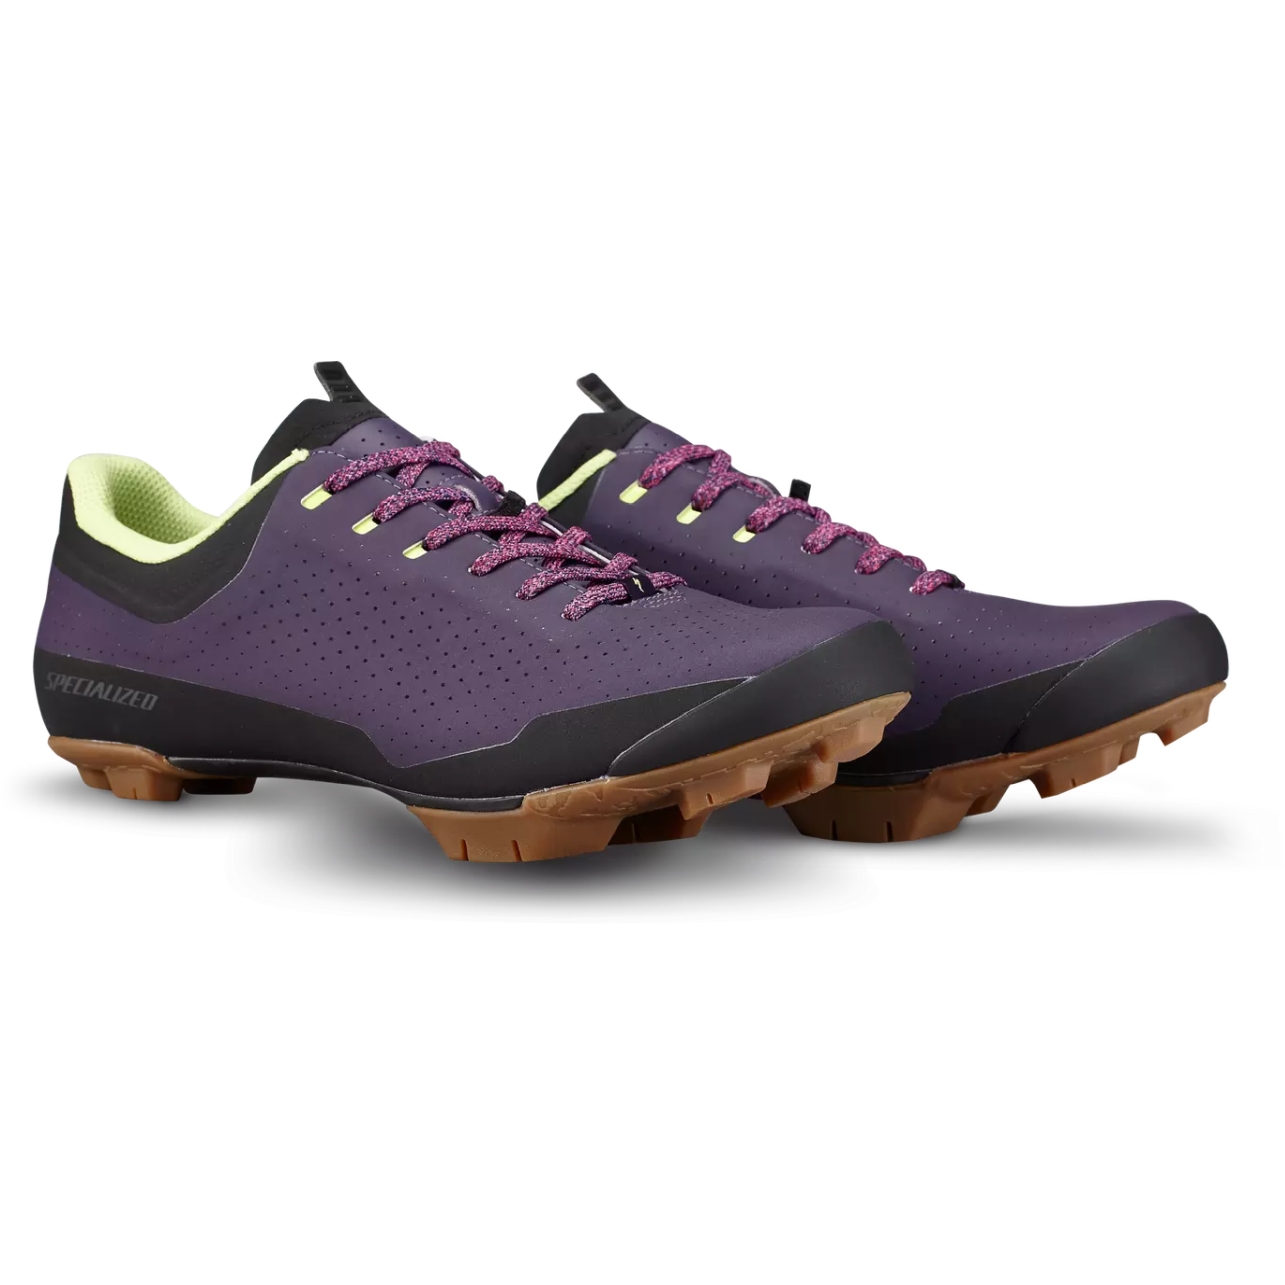 Picture of Specialized Recon ADV Gravel Shoes - Dusk/Purple Orchid/Limestone